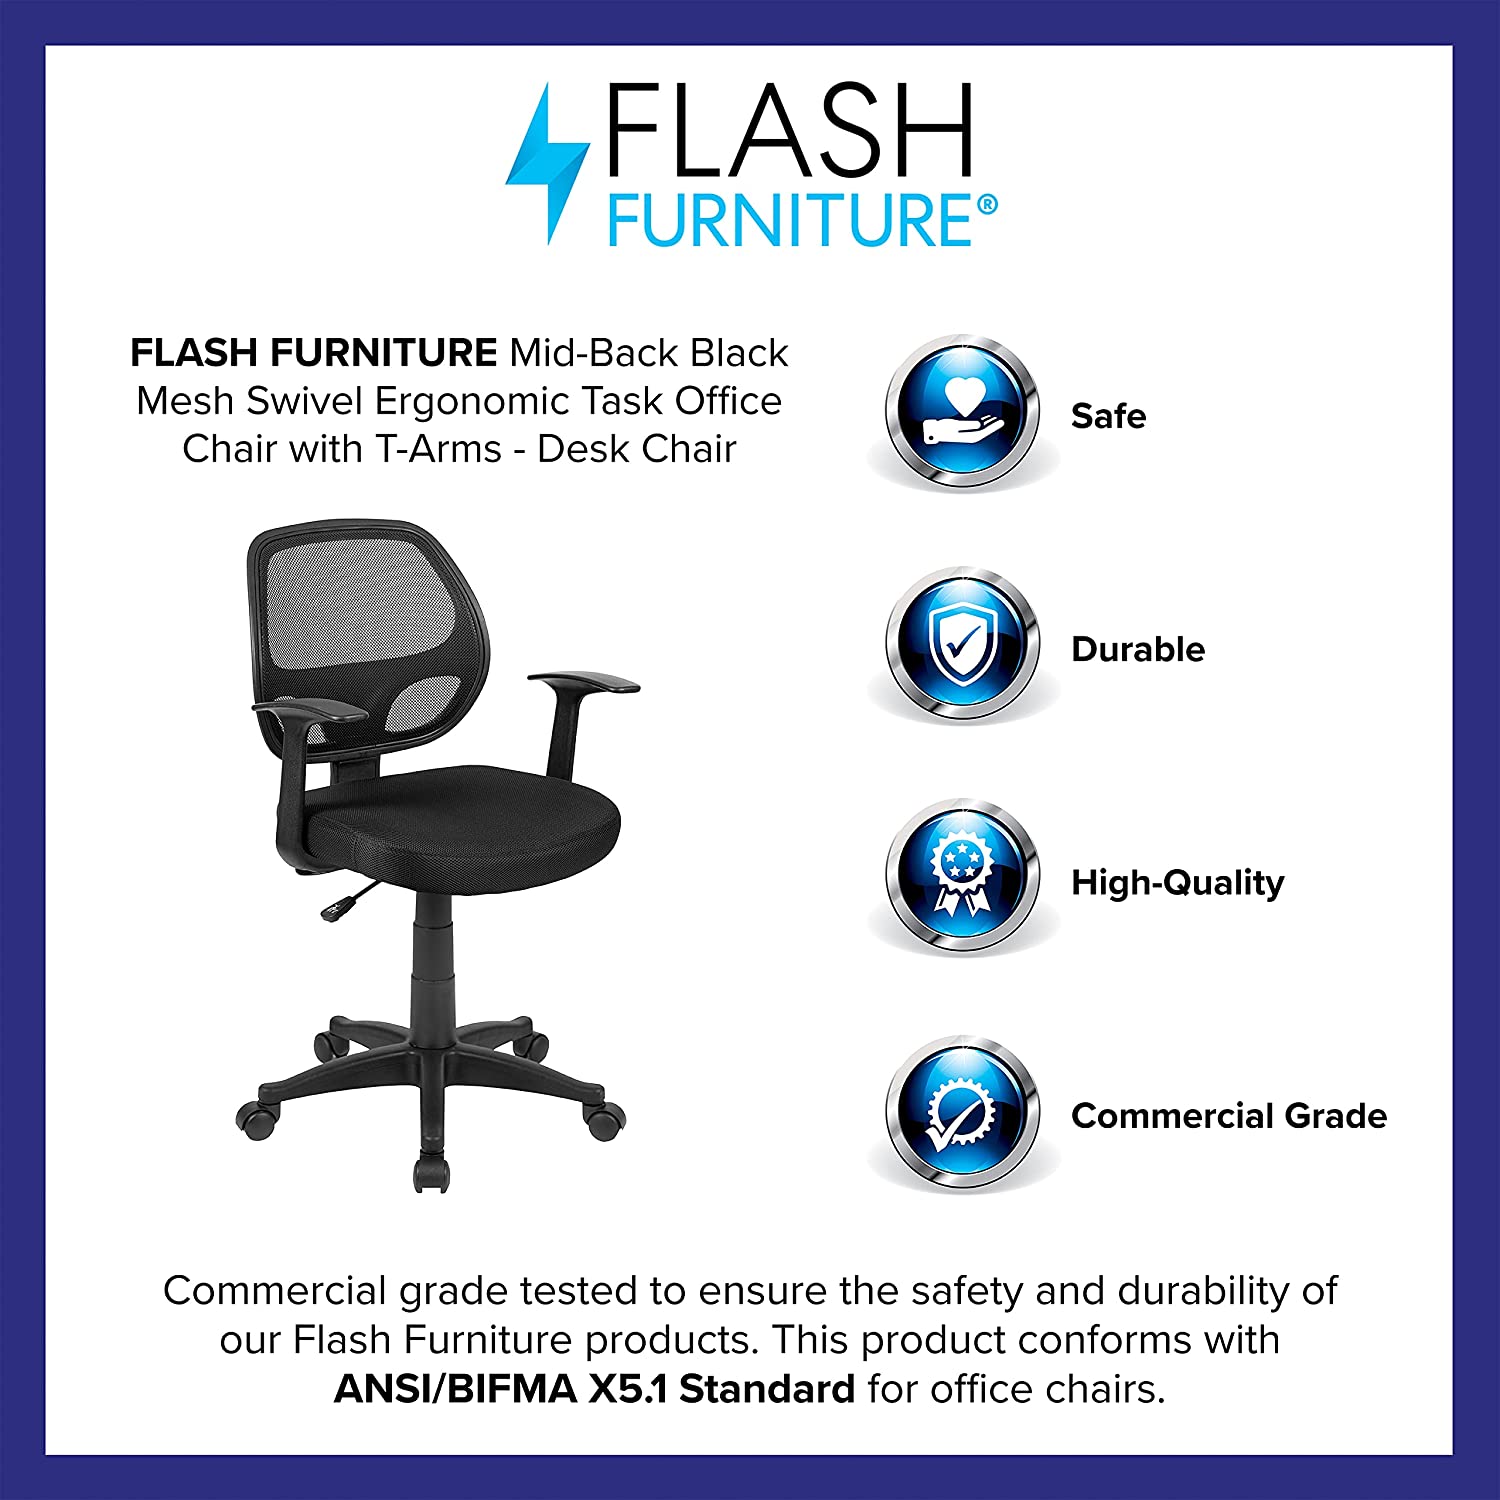 Flash Furniture Mid-Back Black Mesh Swivel Ergonomic Task Office Chair with T-Arms - Desk Chair